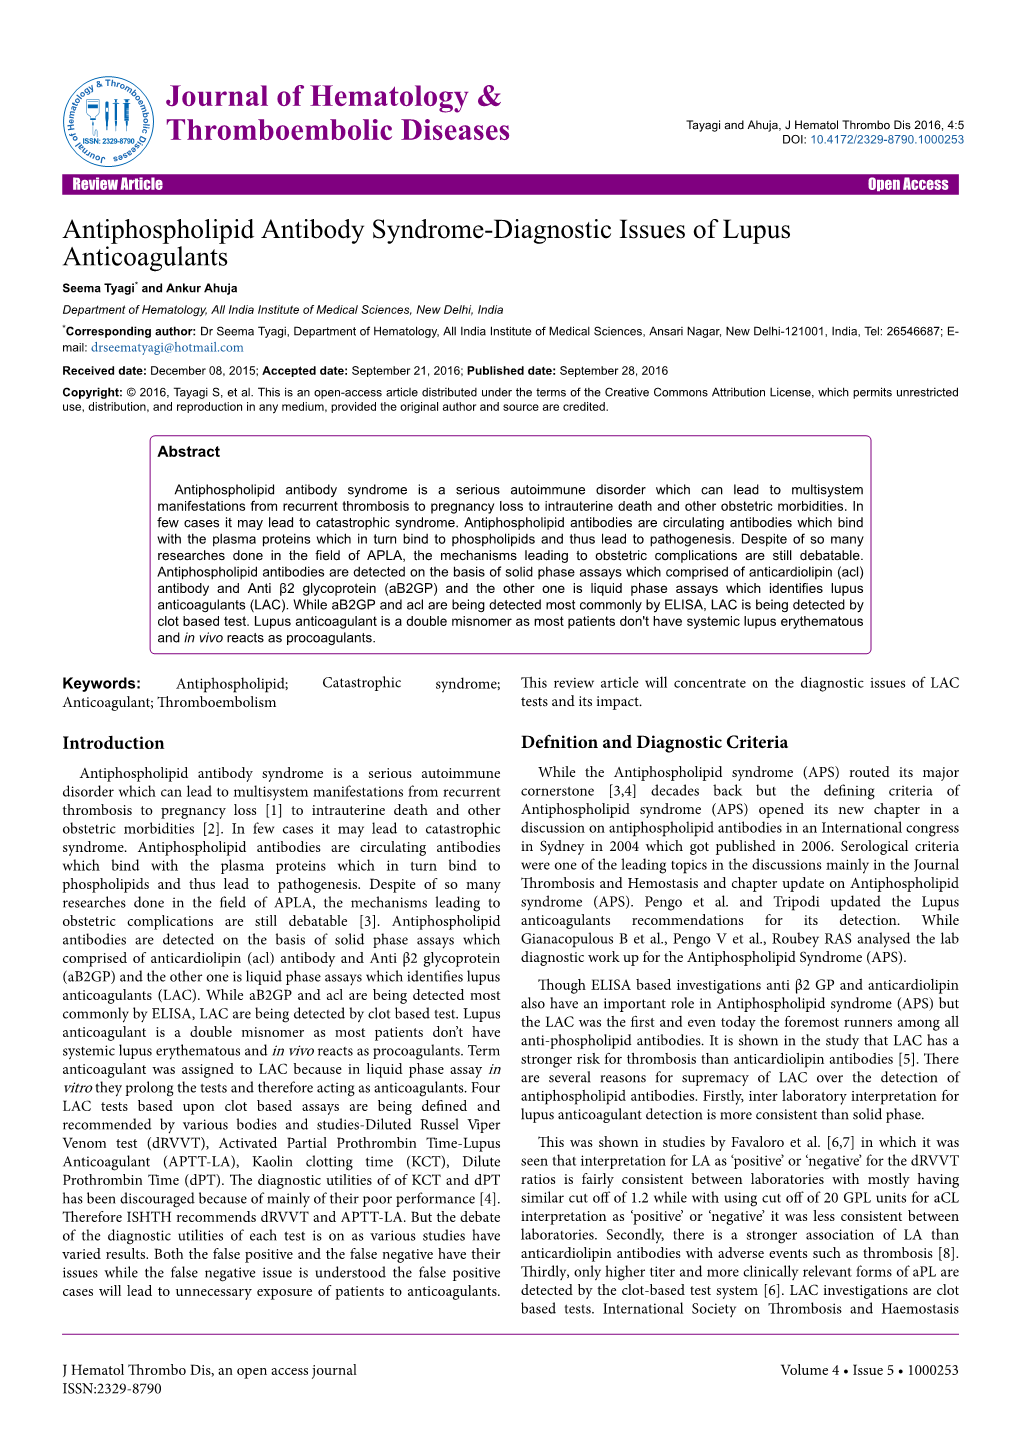 Antiphospholipid Antibody Syndrome-Diagnostic Issues Of